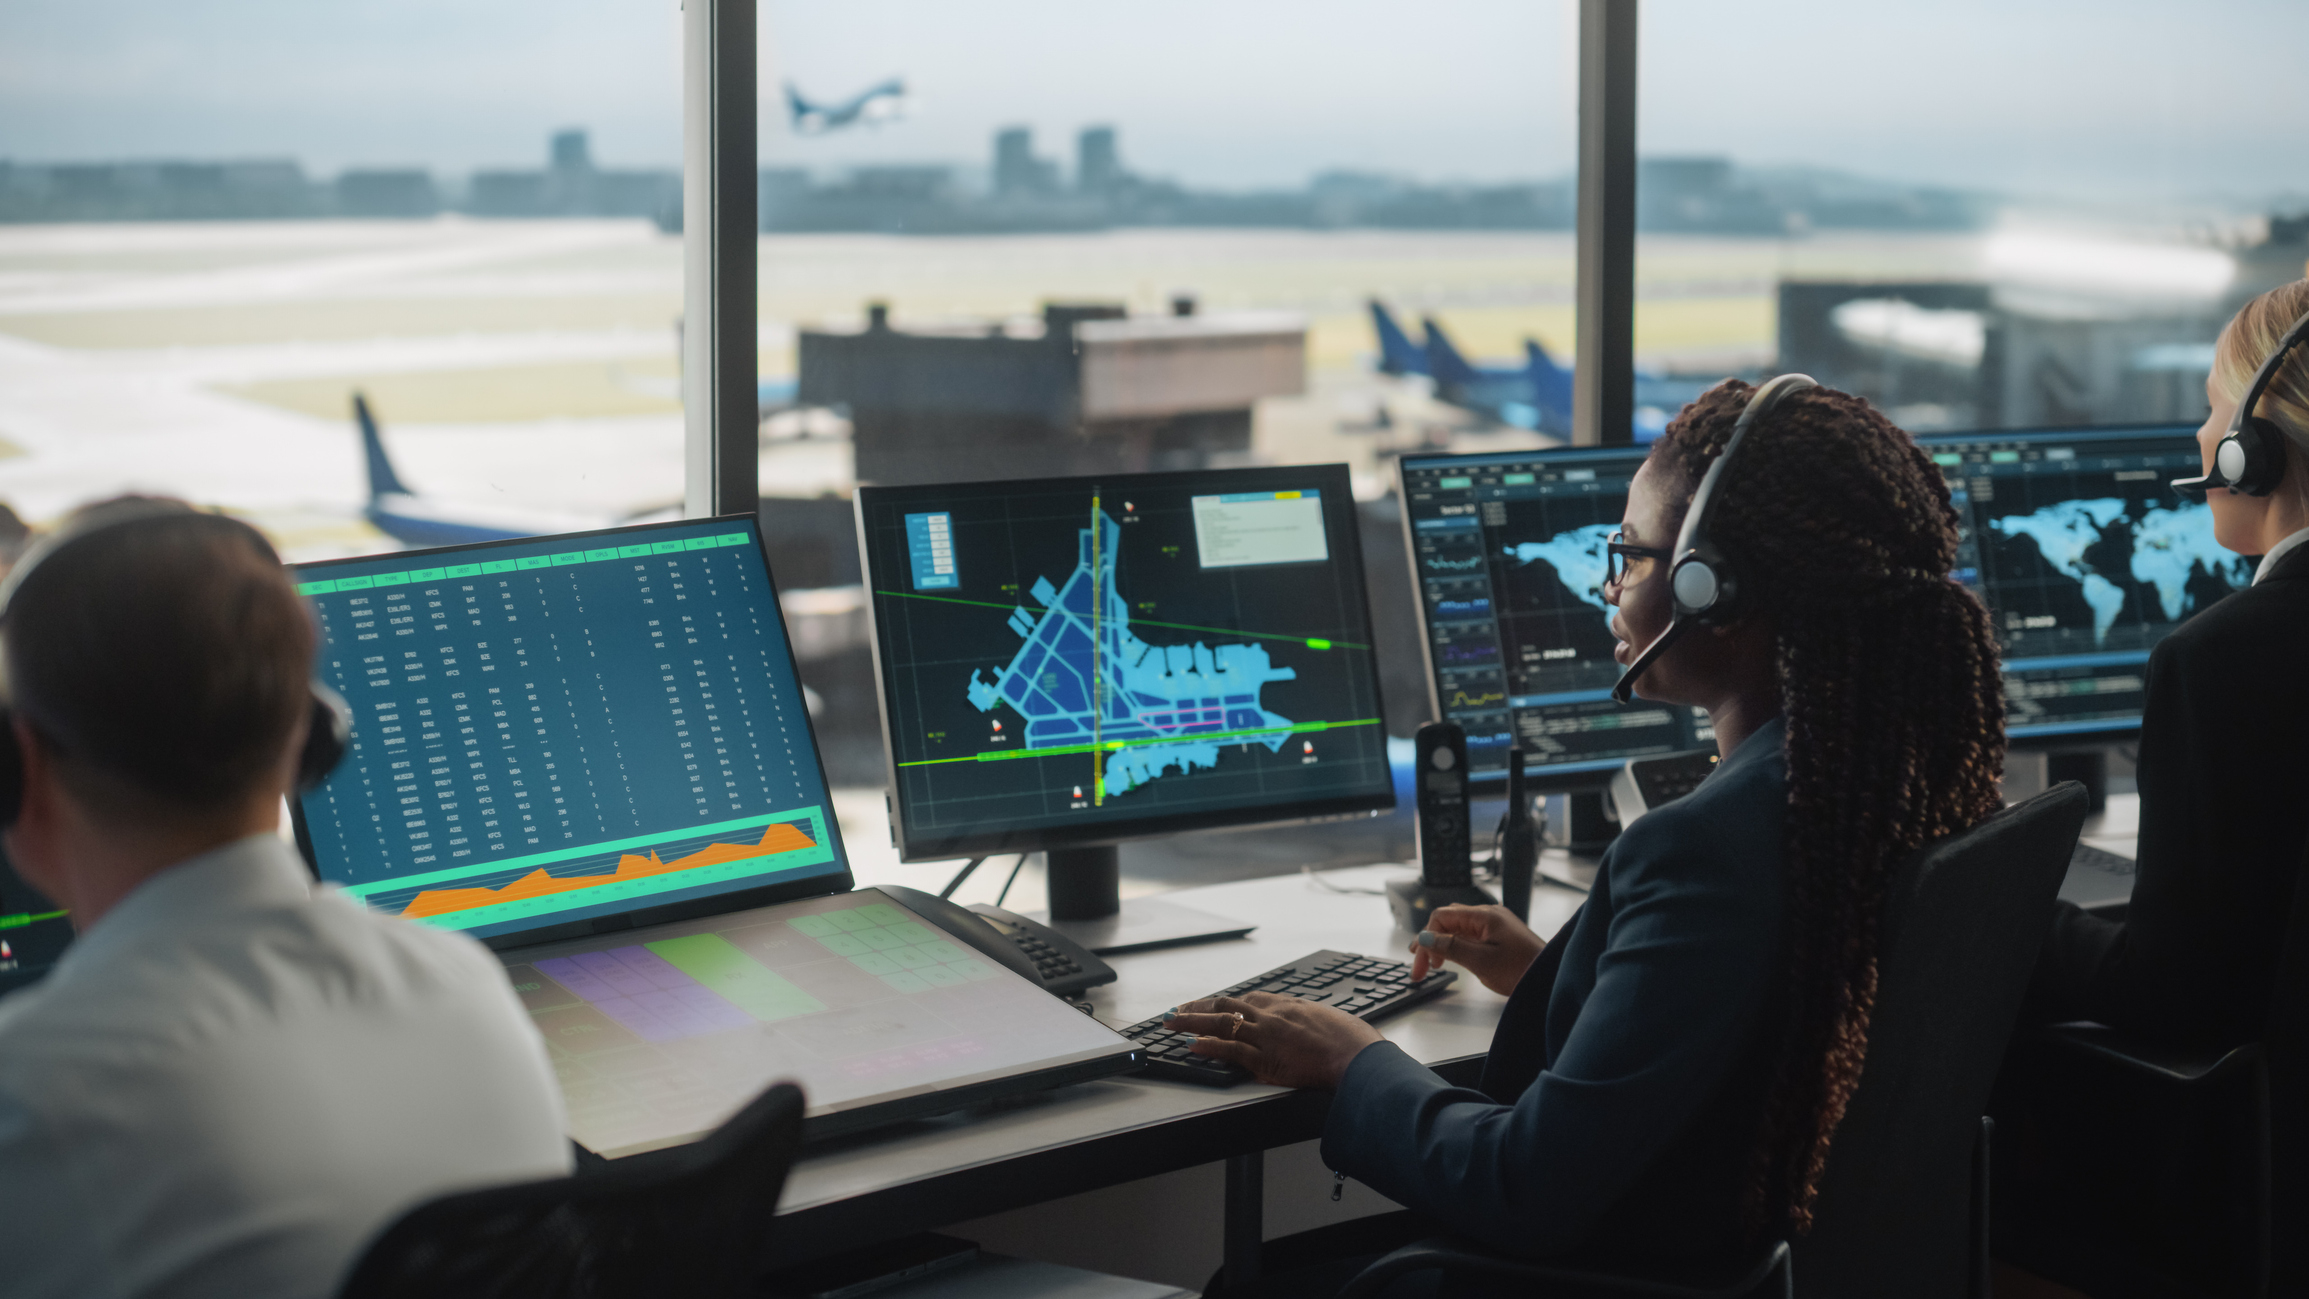 Air traffic controllers working at station with radar screens, focusing on monitoring and coordinating aircraft movements